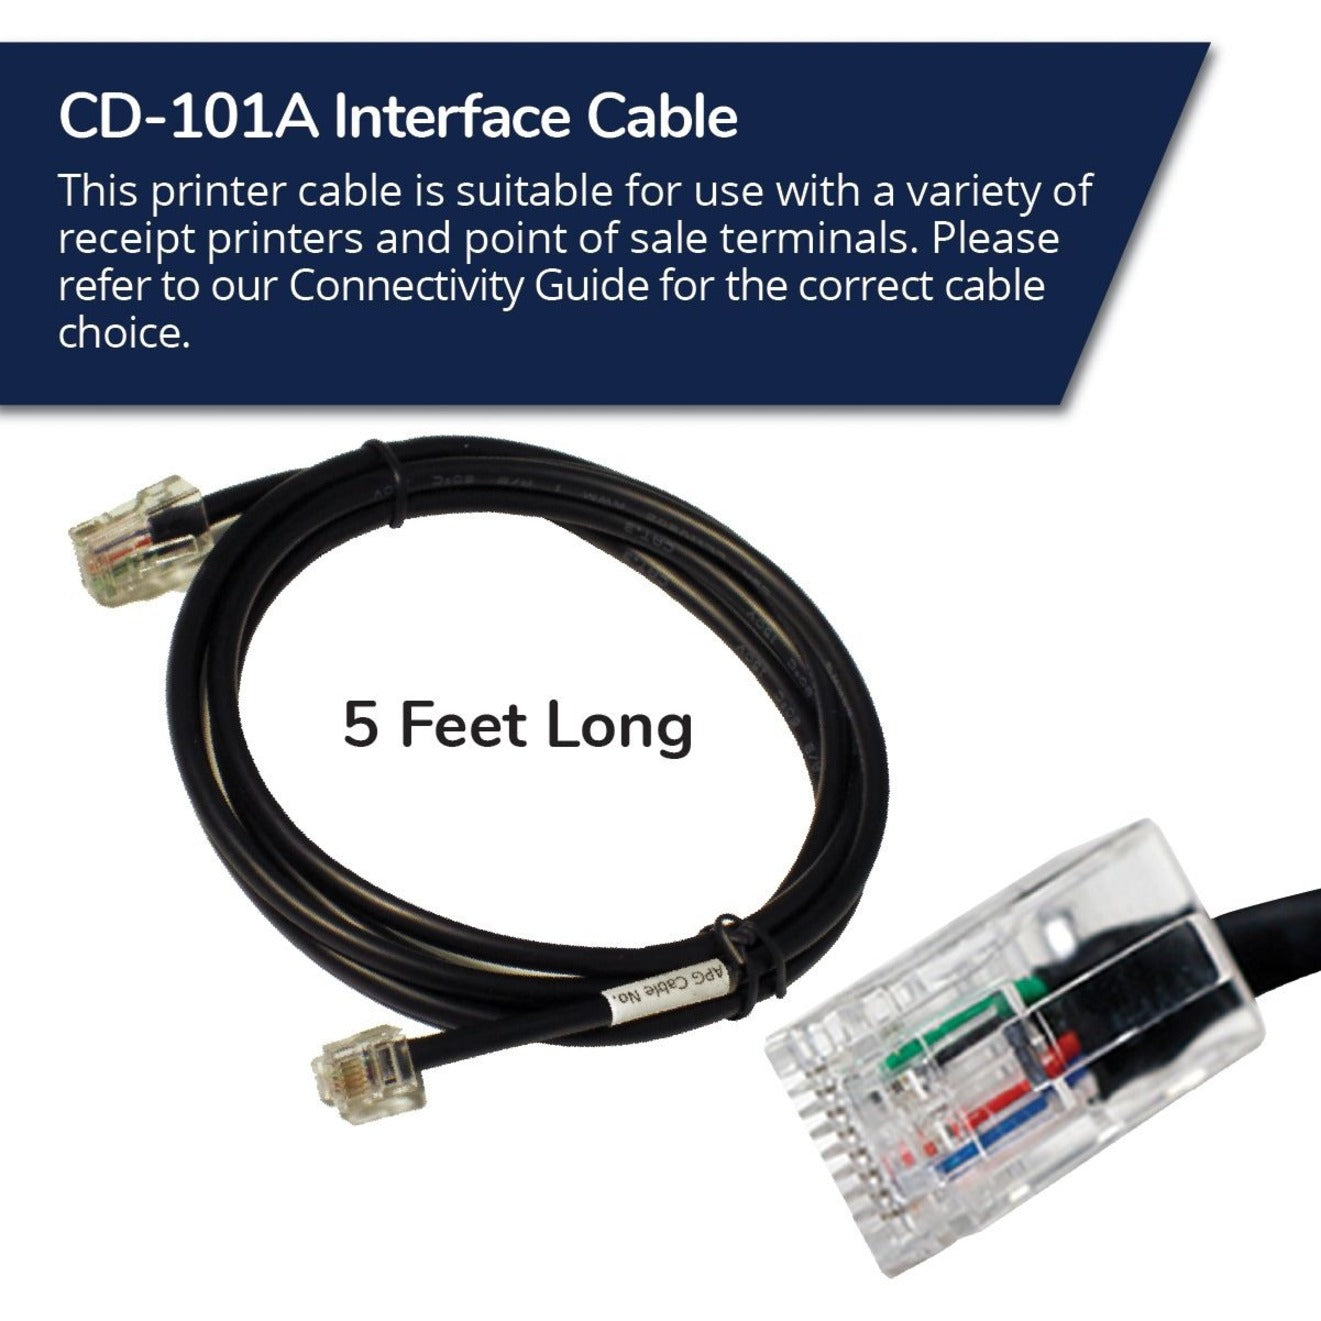 APG CD-101A RJ-12/RJ-45 Data Transfer Cable, 5 ft, Copper Conductor